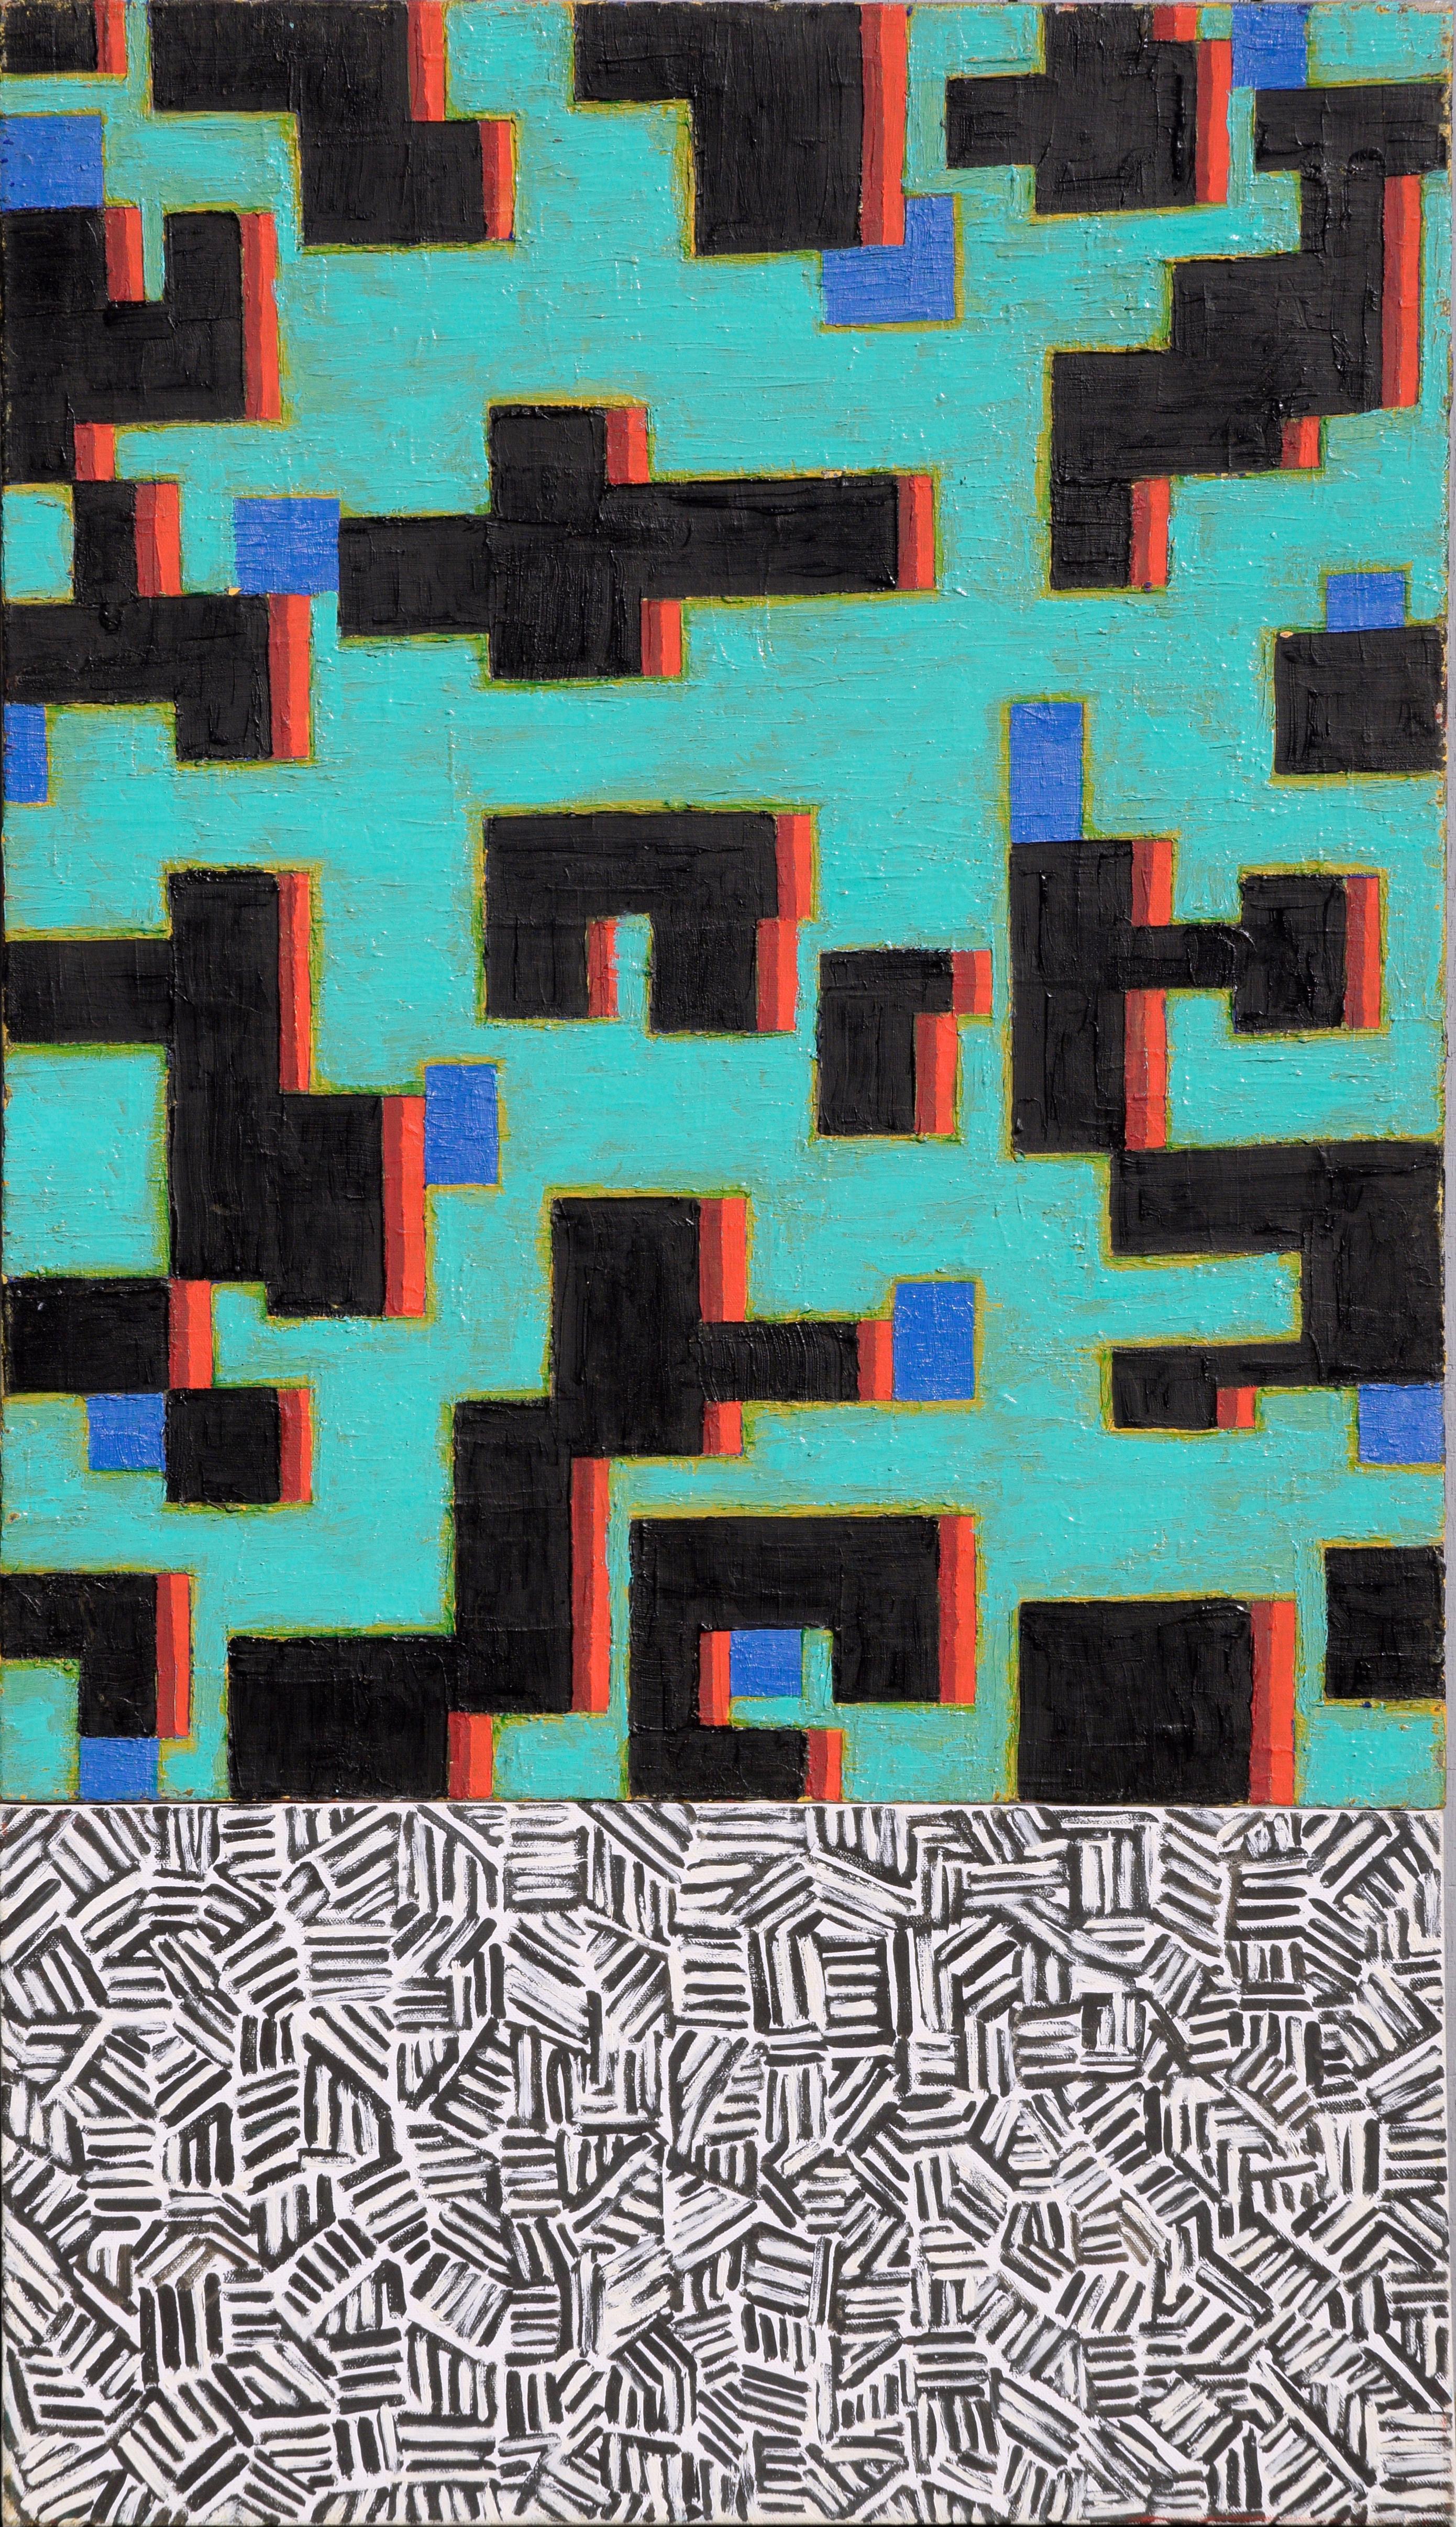 Contemporary Two-Part Geometric Abstract: Teal and Monochrome - Abstract Geometric Painting by Michael Pauker 